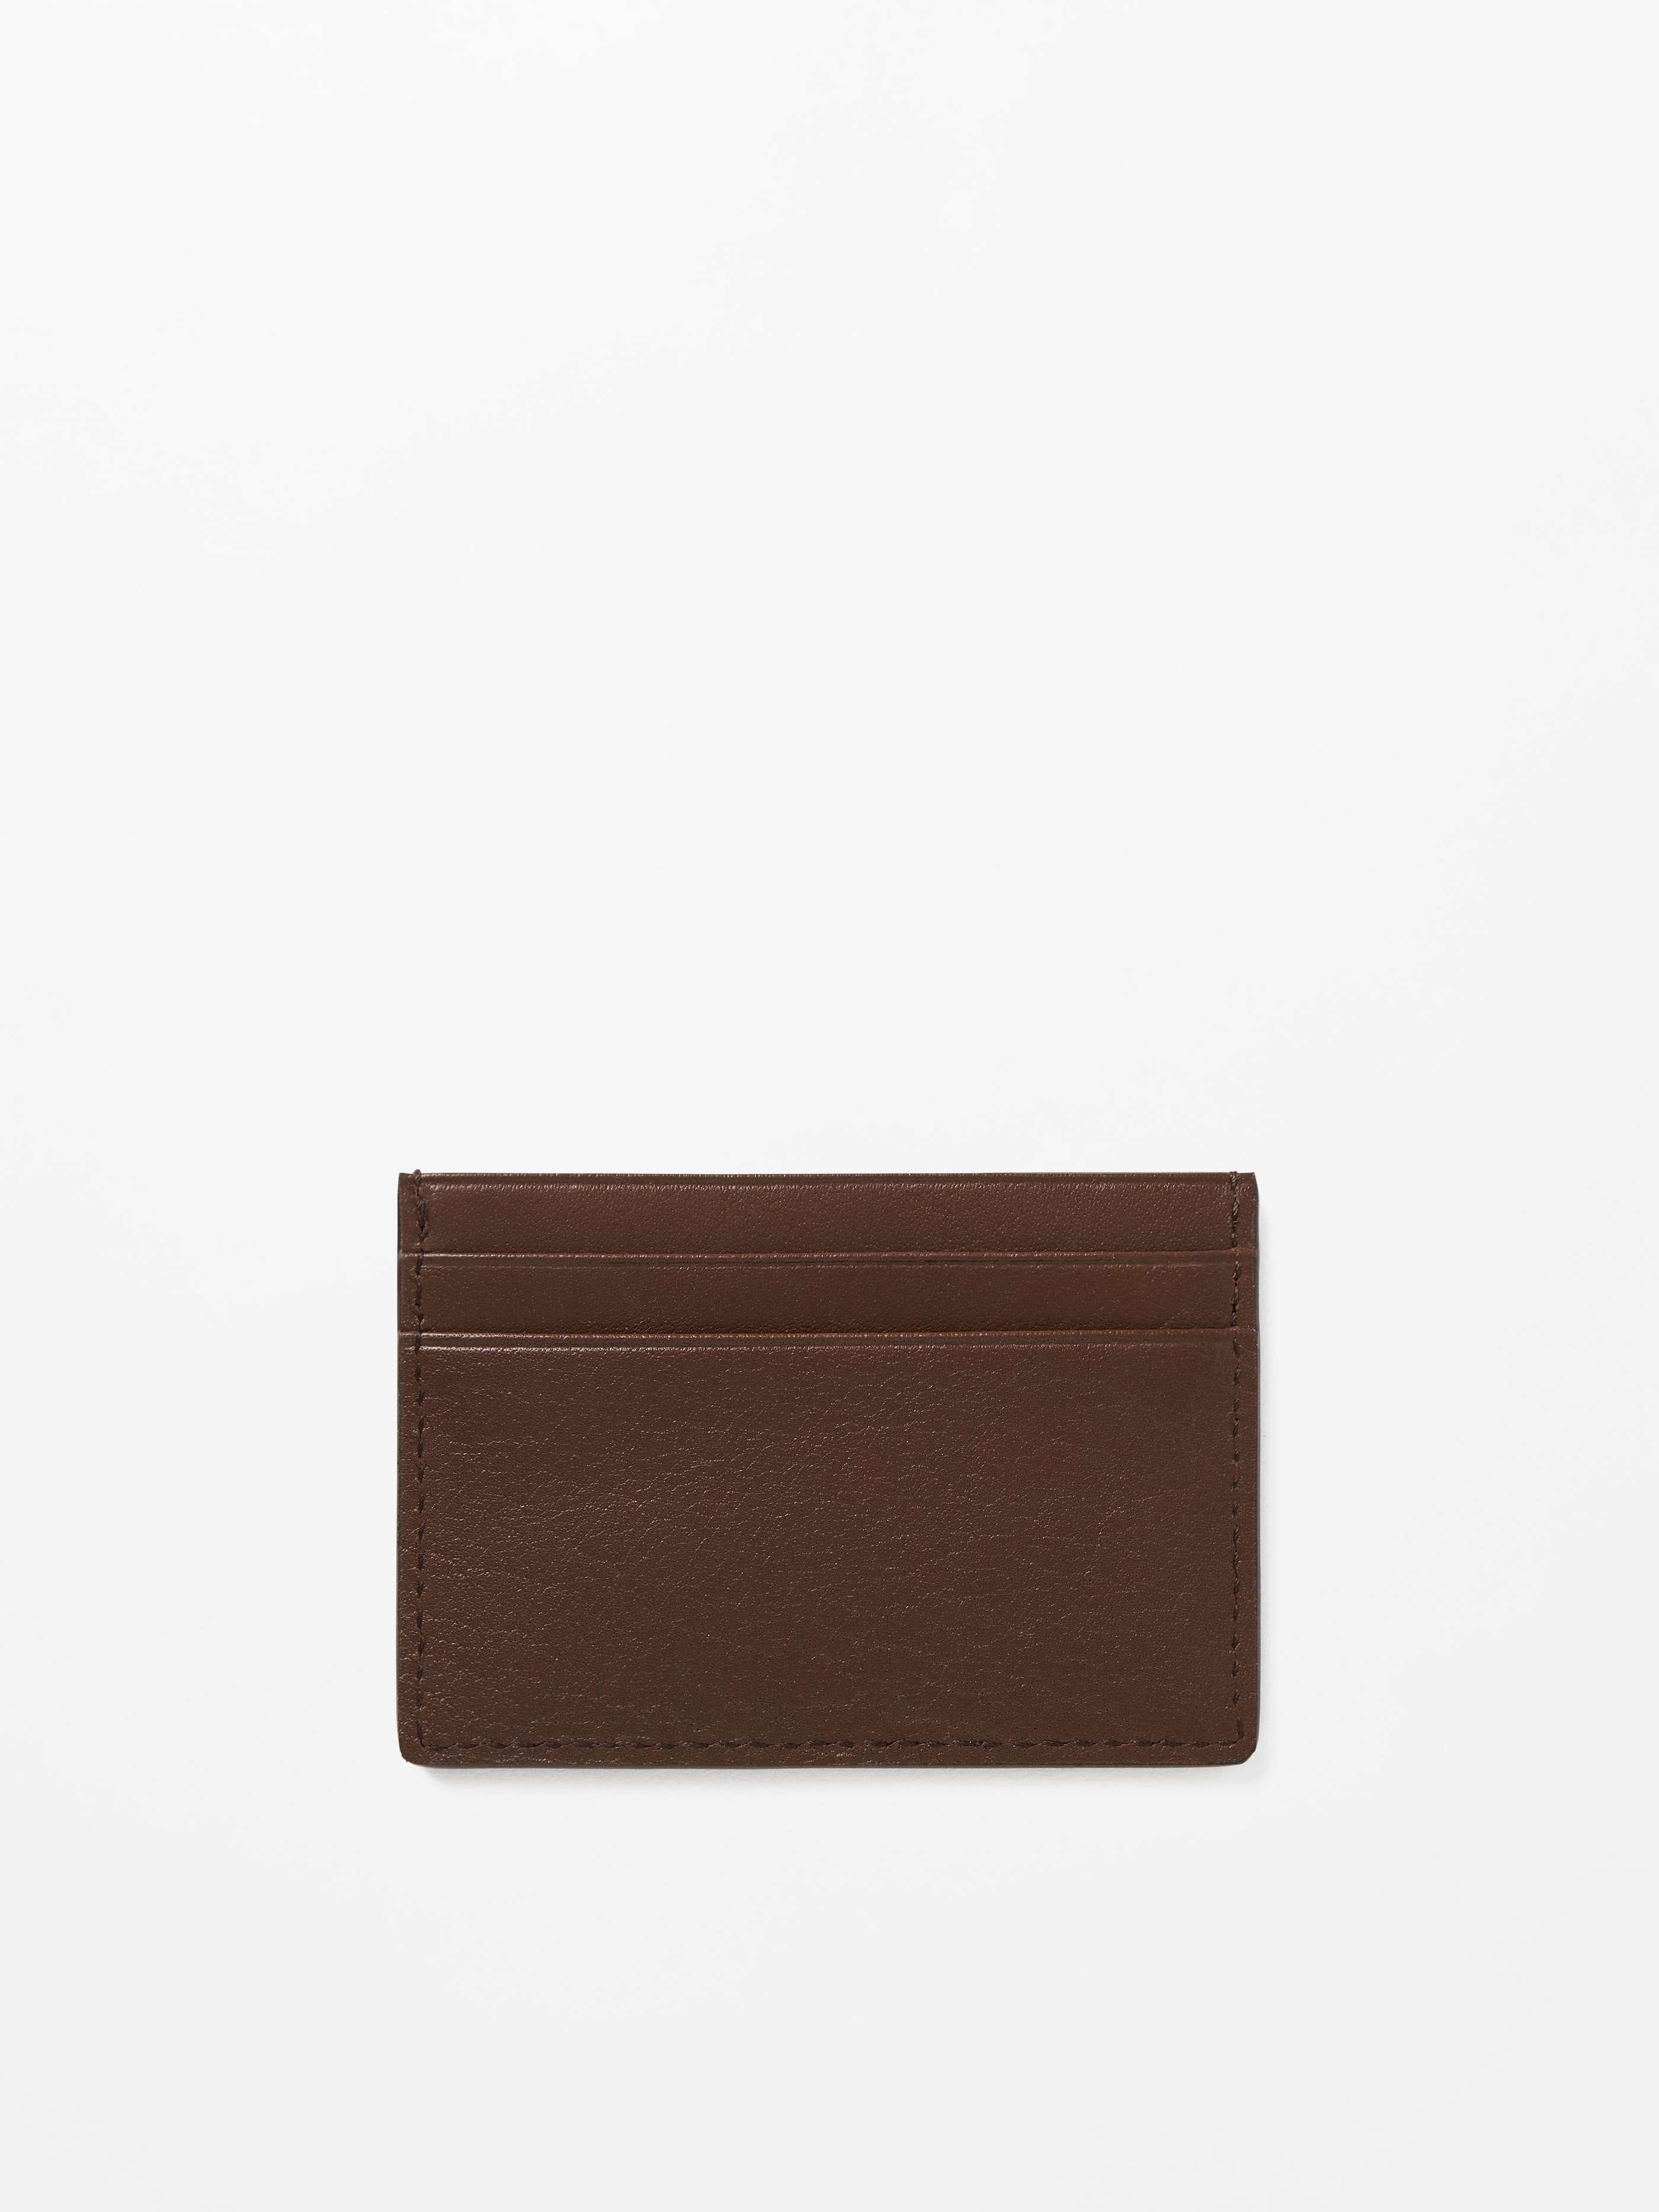 TIGER OF SWEDEN WAKE CARDHOLDER IN COGNAC U69380009Z 12S | Shop from eightywingold an official brand partner for TIGER OF SWEDEN CANADA &amp; US